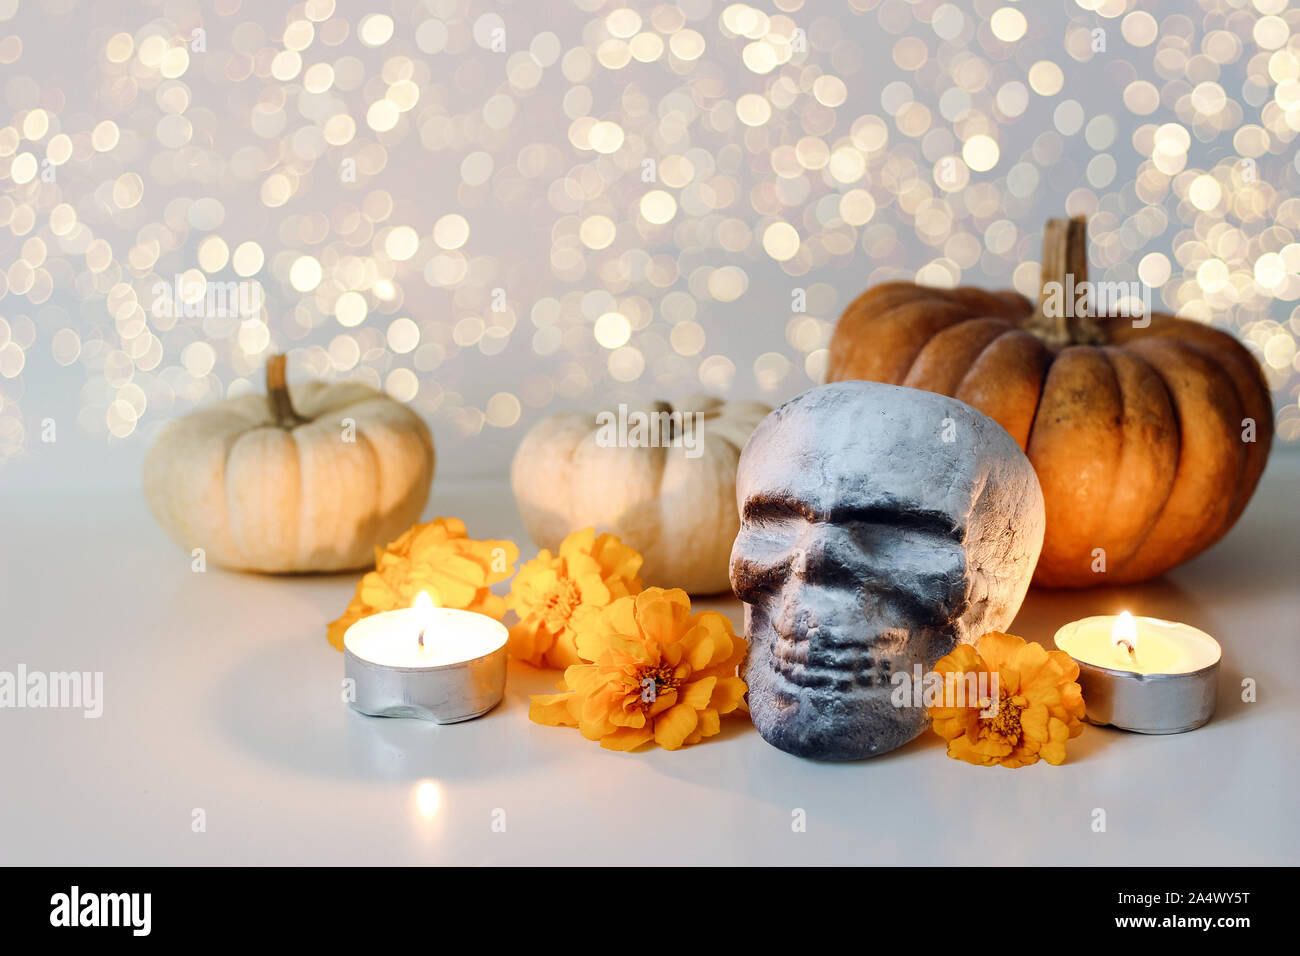 Dia de los Muertos, Mexican Day of the Dead table composition. Orange tagetes, marigold flowers and artificial skull decoration. Burning candles and Stock Photo